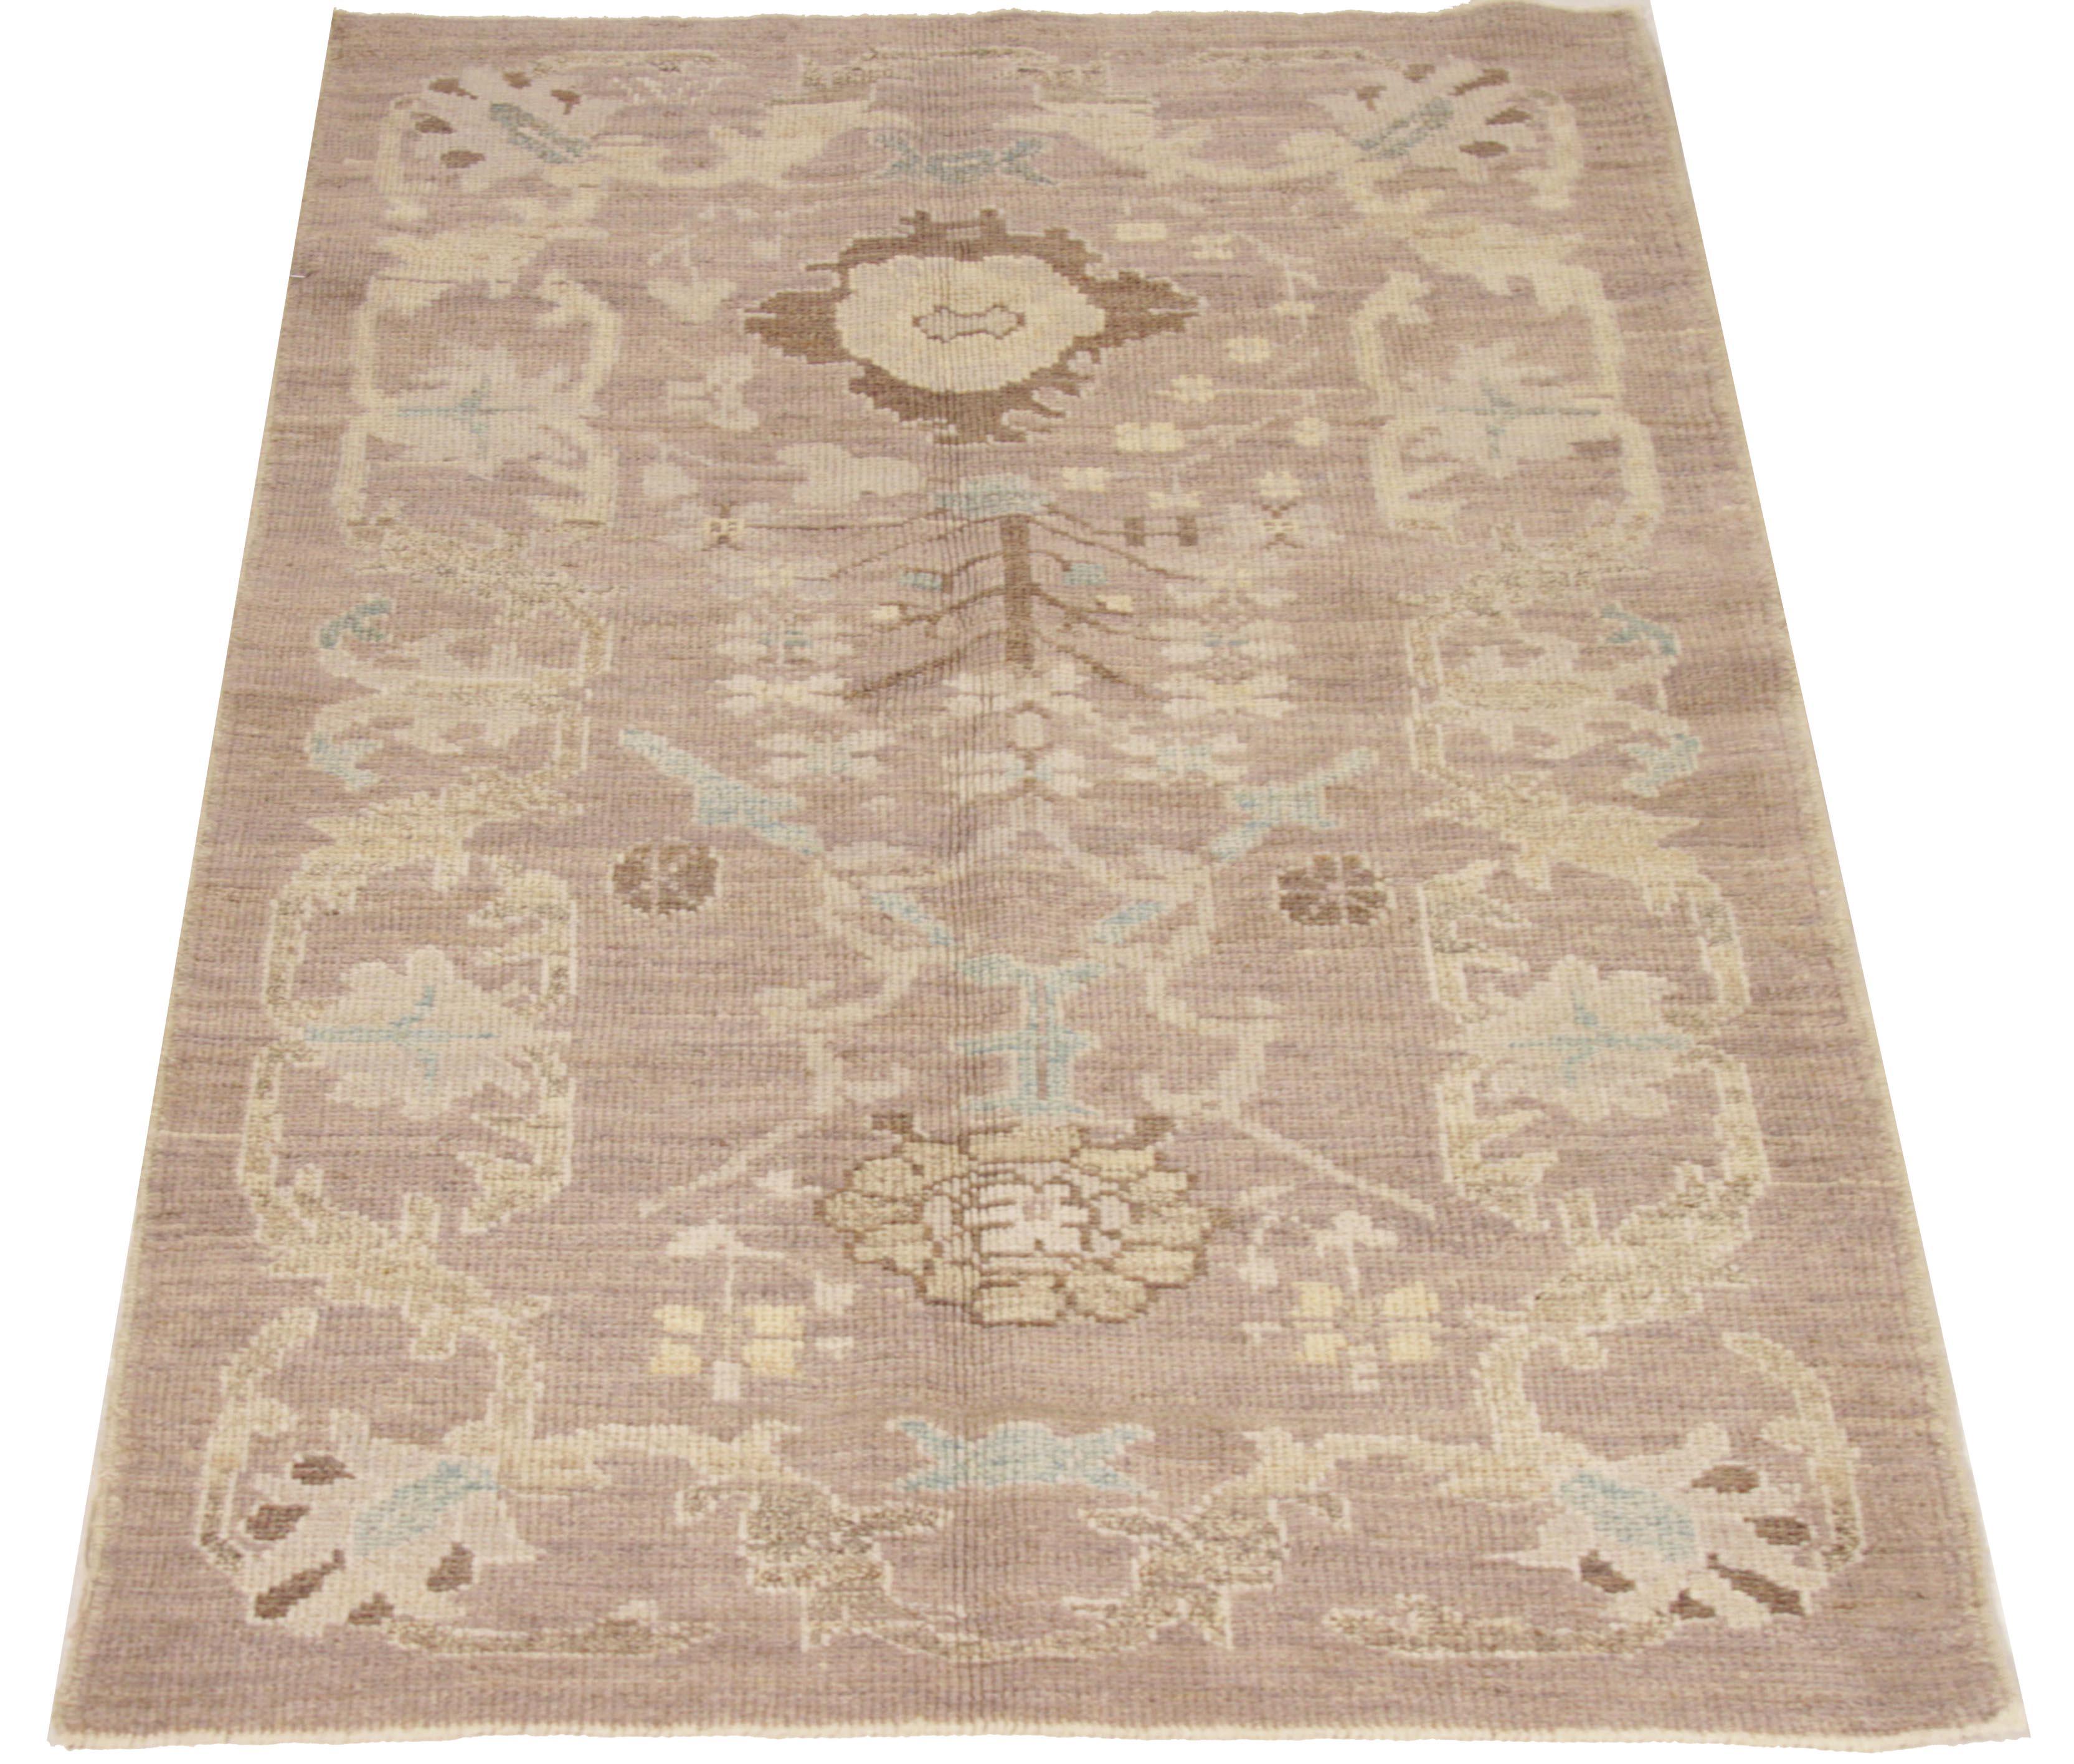 Handcrafted Persian rug made from the finest sheep’s wool and colored with 100% organic vegetable dyes that are safe for humans and pets. It shows a traditional Oushak design featuring a brown field with blue and beige floral patterns. It’s an